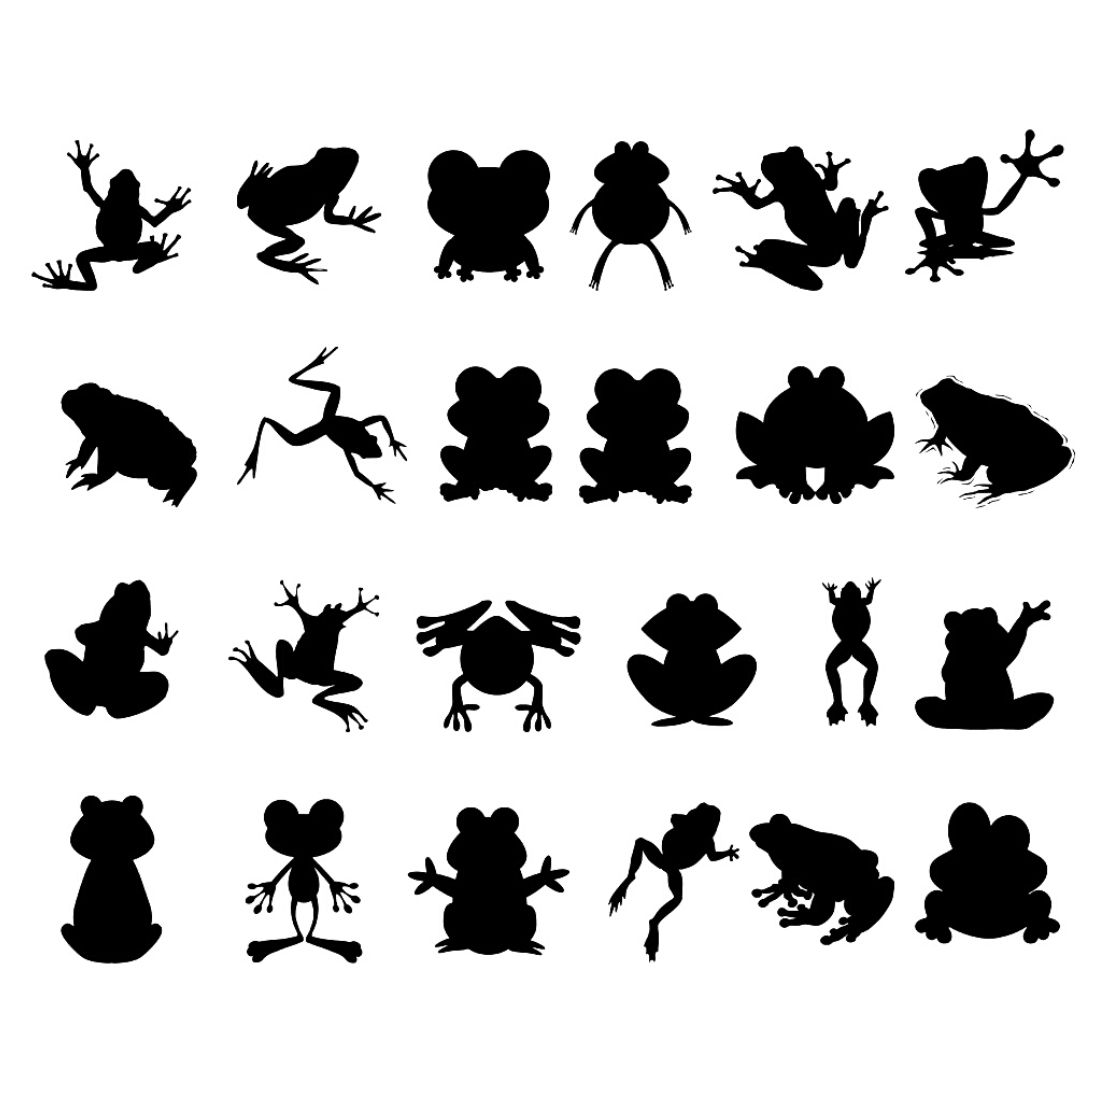 Collection of frog silhouettes on a white background.